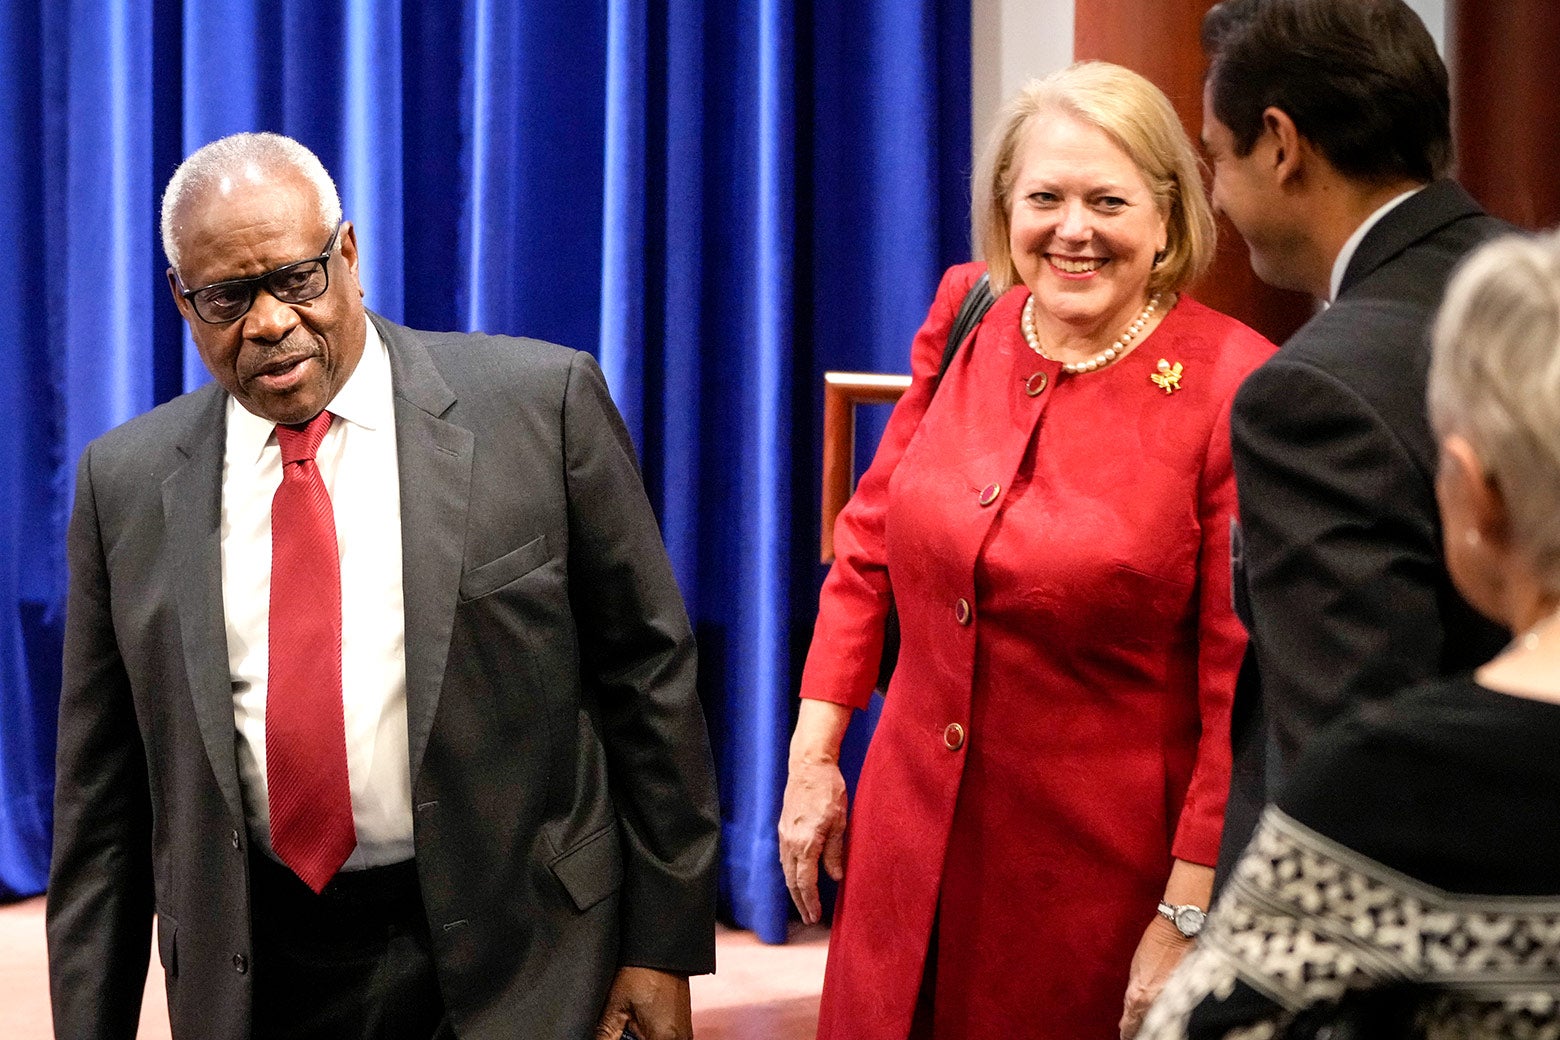 Clarence Thomas and Virginia Thomas arrive at a function.